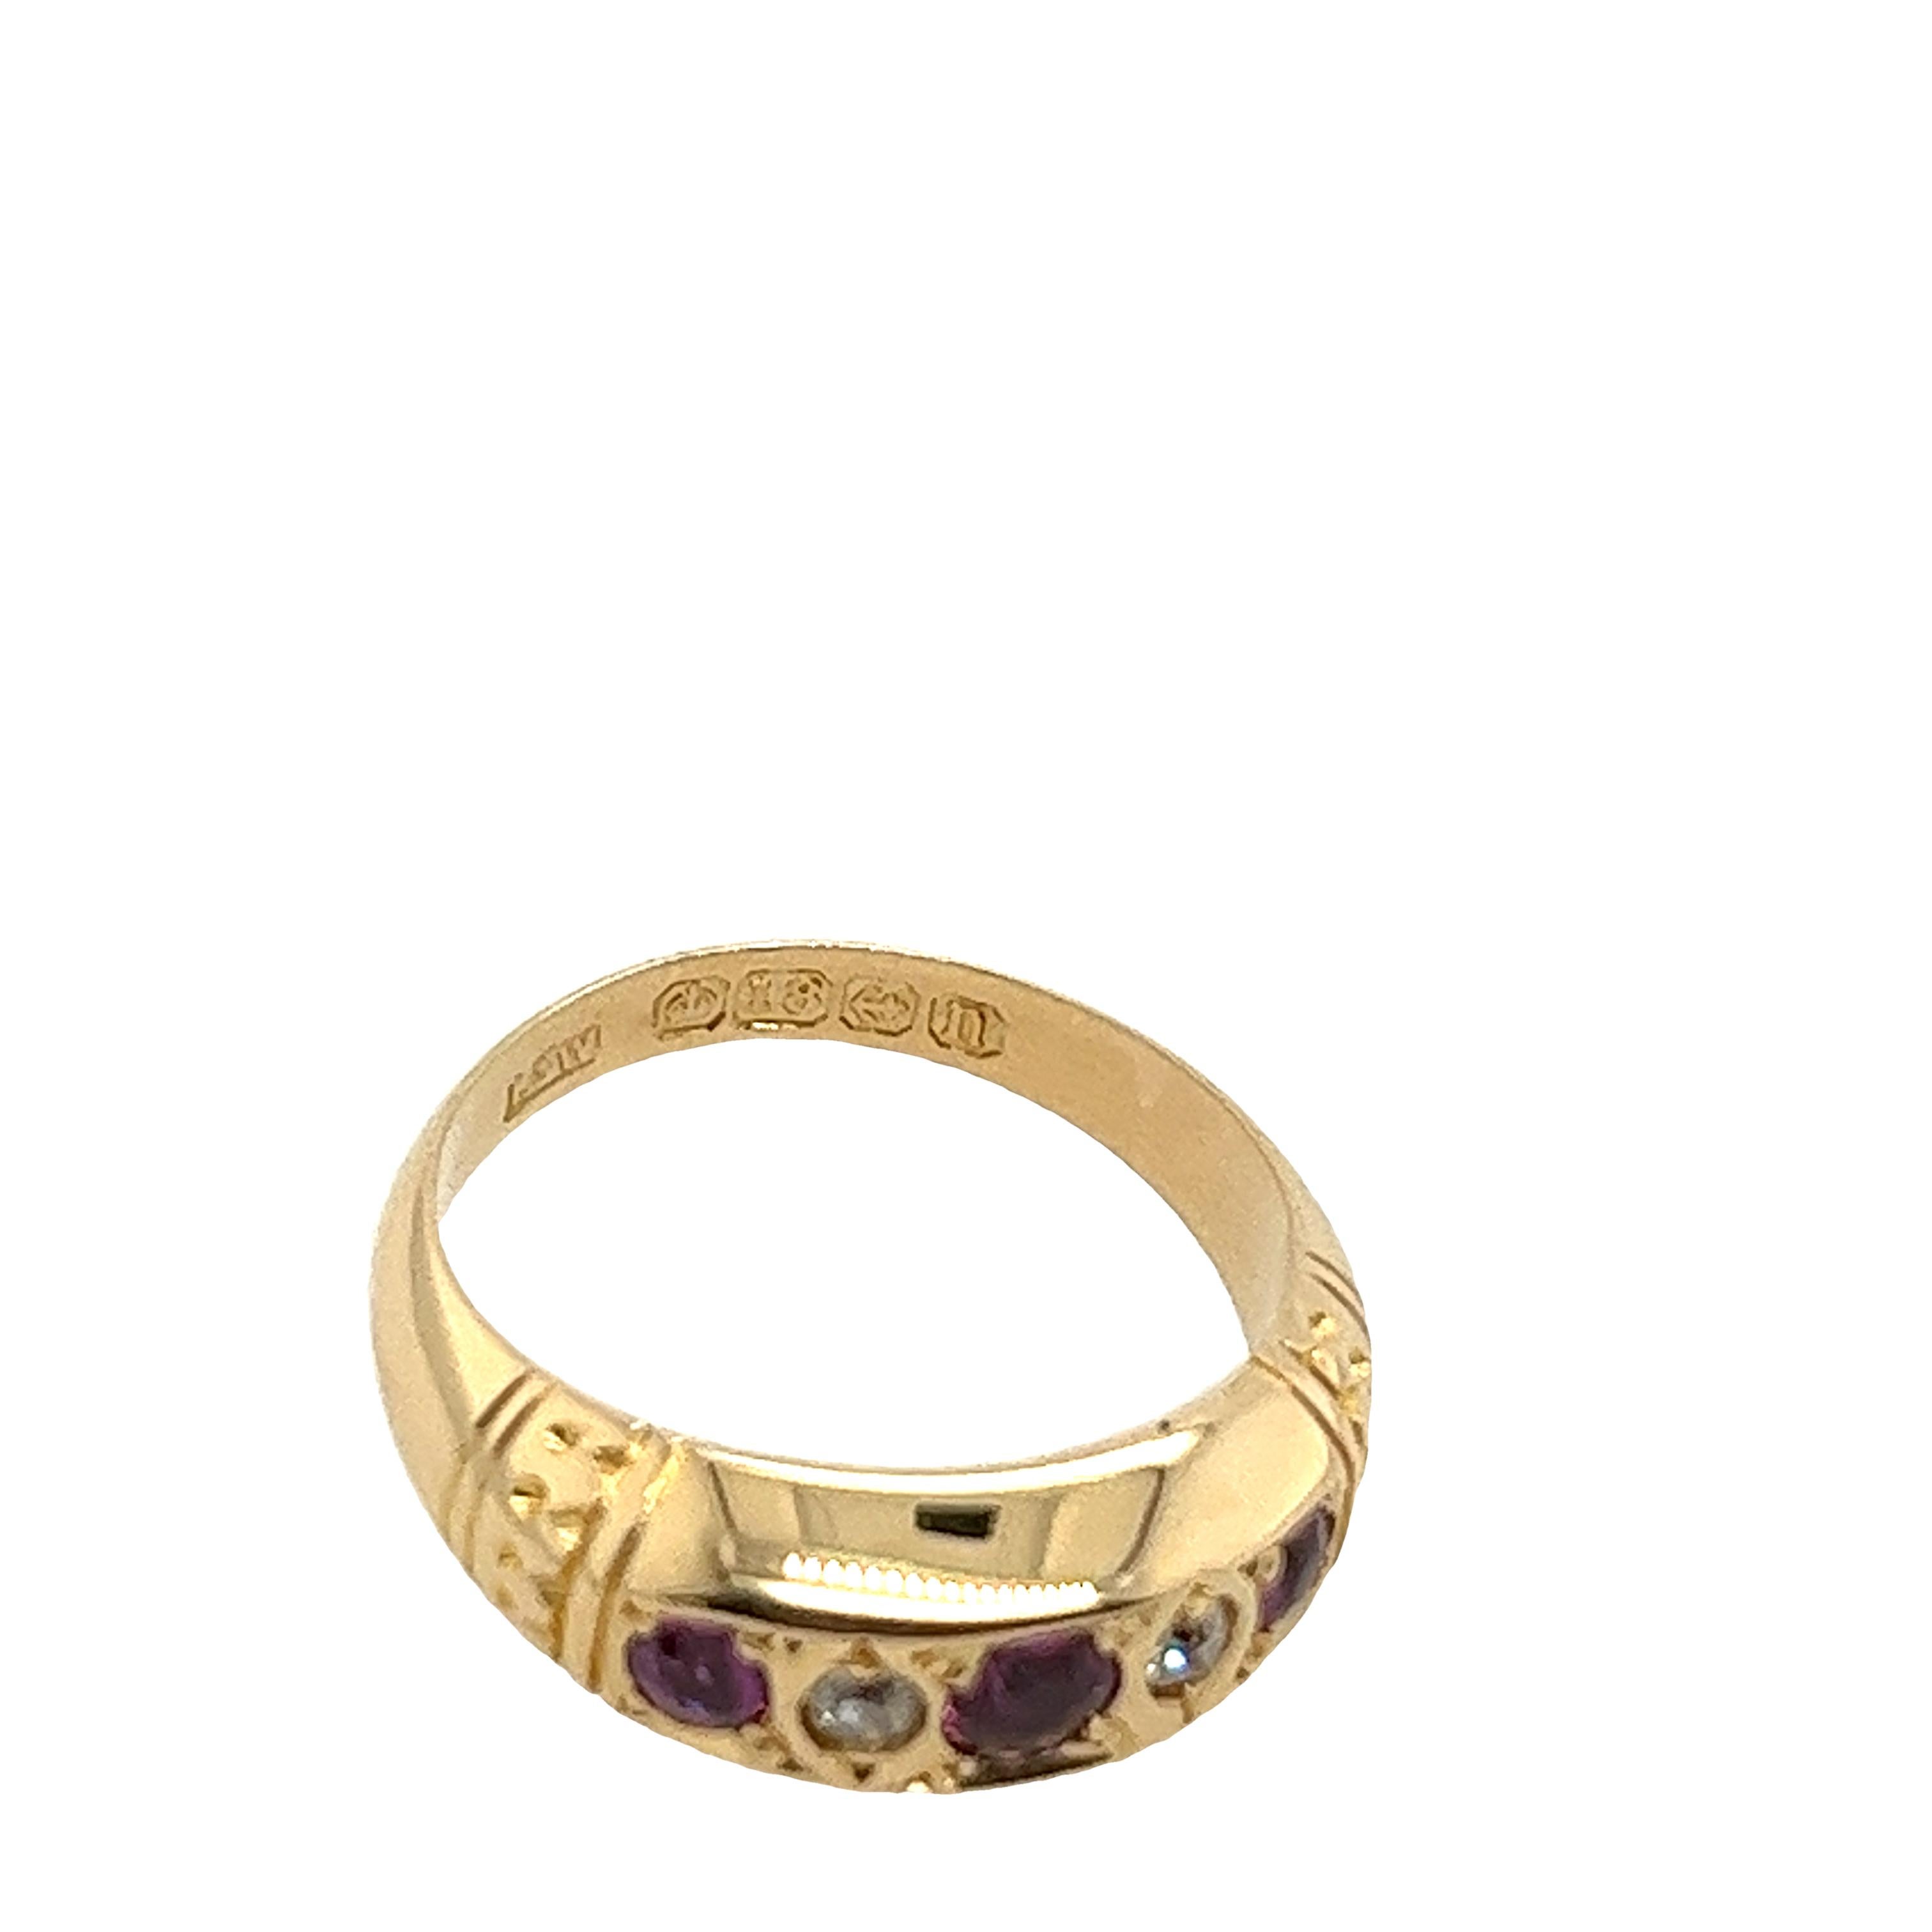 An elegant vintage 5-stone ring, set with 2 round diamonds and 3 round fine quality rubies, in an 18ct yellow gold setting.

Total Diamond Weight: 0.04ct
Diamond Colour: H-I
Diamond Clarity: I1
Width of Band: 2.95mm
Width of Head: 6.75mm
Length of